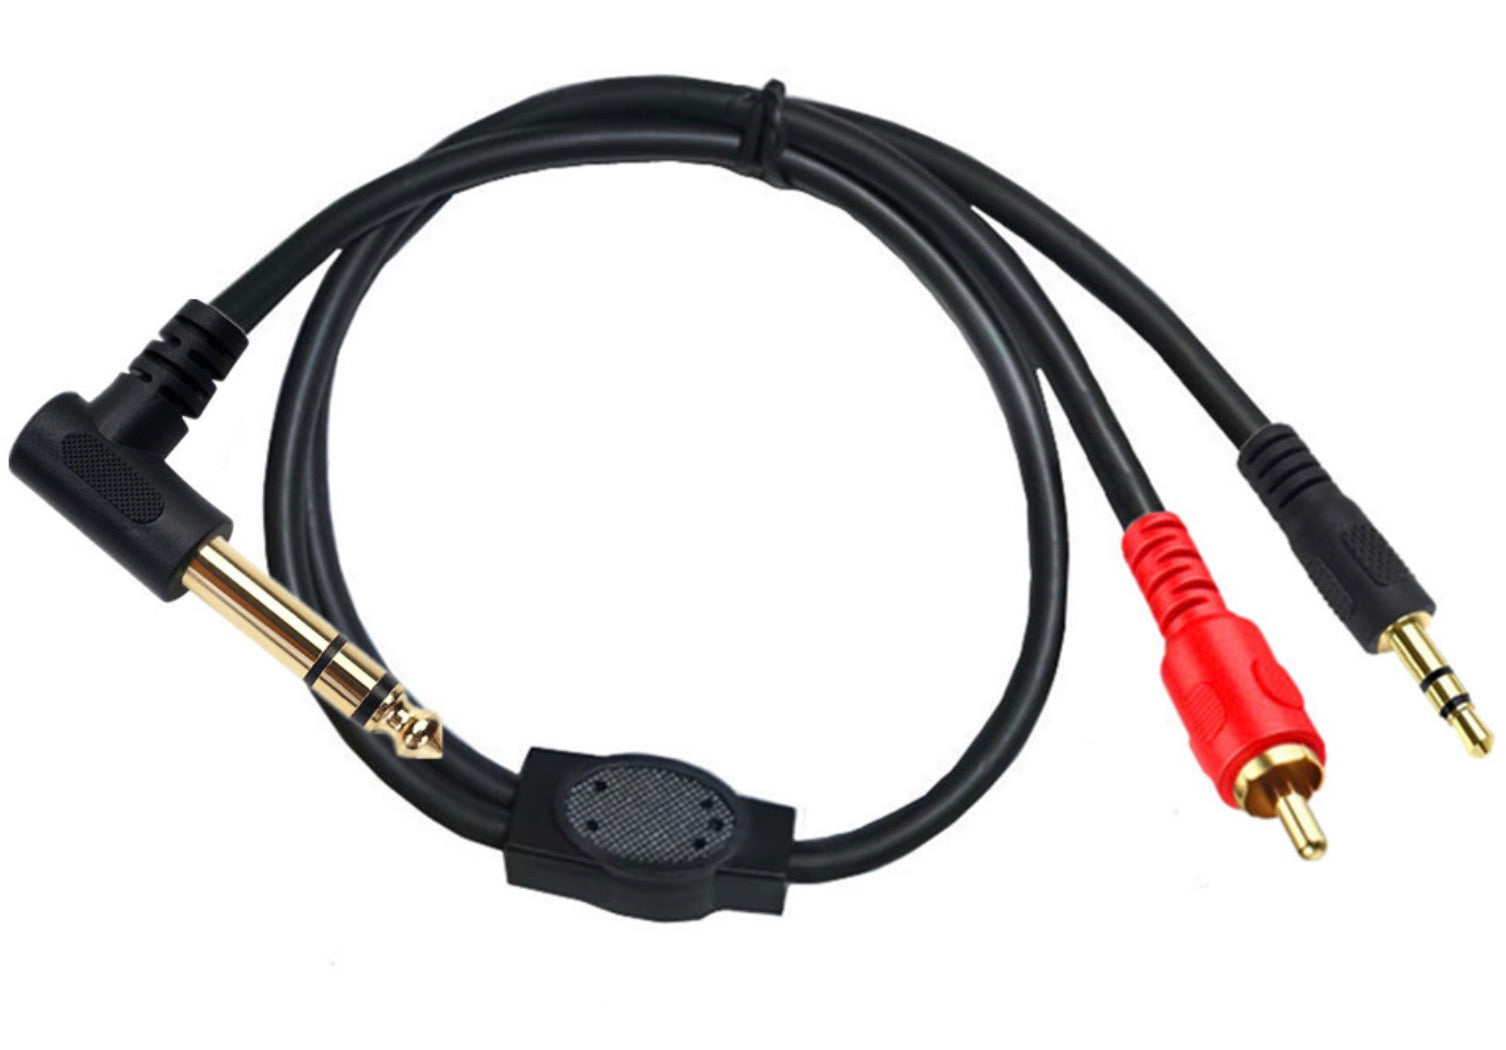 6.35mm 1/4" Angled Male TRS to 3.5mm + RCA Male Stereo Audio Cable 0.5m